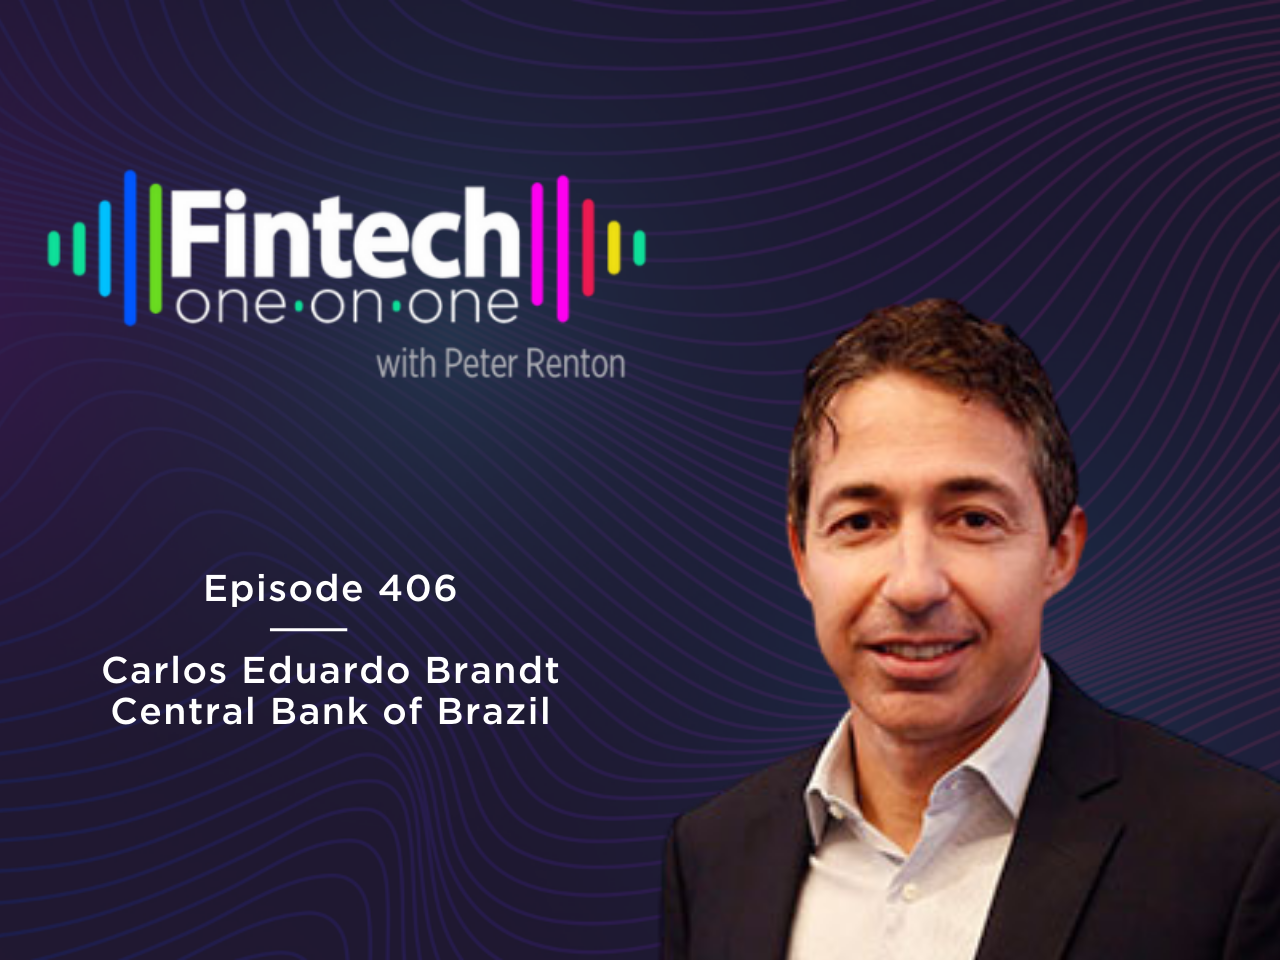 Carlos Eduardo Brandt, Head of the Management & Operations of Pix at the Central Bank of Brazil